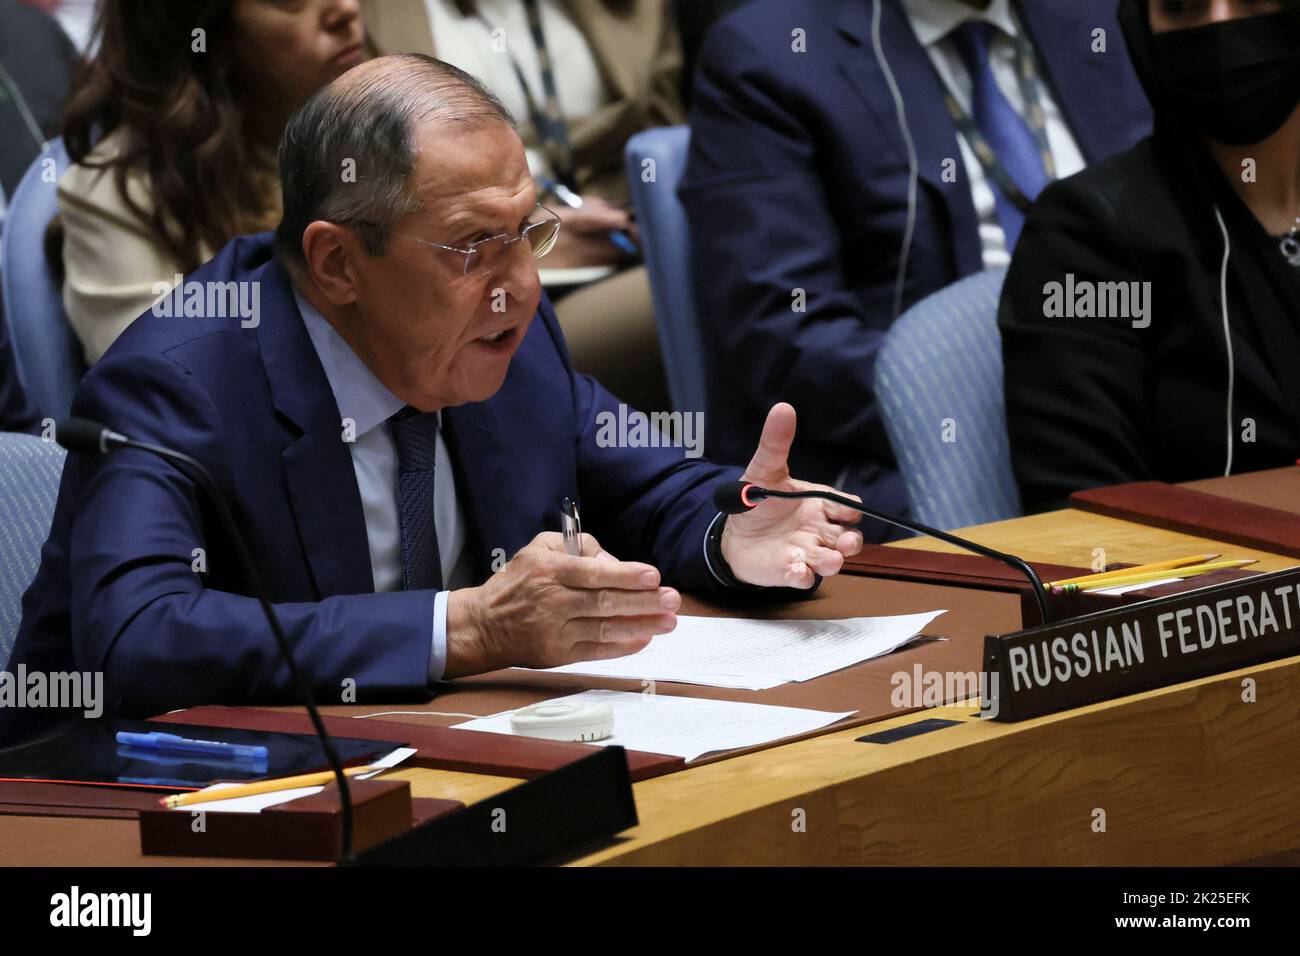 Russia's Foreign Minister Sergei Lavrov speaks during a high level meeting of the United Nations Security Council on the situation amid Russia's invasion of Ukraine, at the 77th Session of the United Nations General Assembly at U.N. Headquarters in New York City, U.S., September 22, 2022. REUTERS/Brendan McDermid Stock Photo